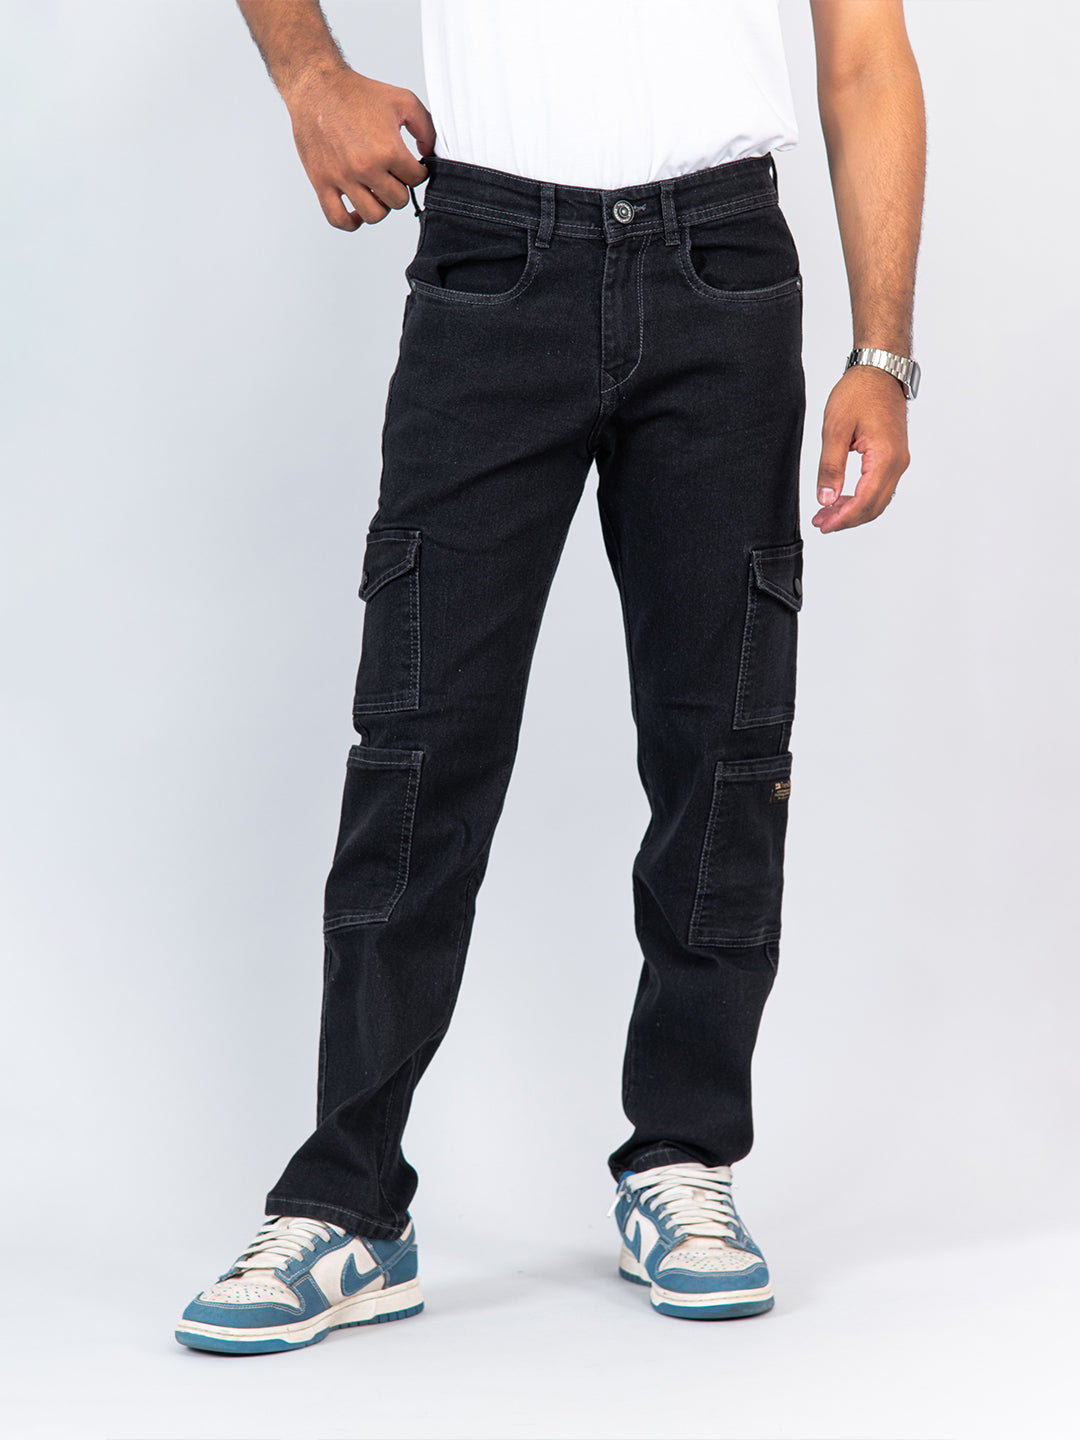 Men's Ballroom Double Flex Standard Fit Jeans | Duluth Trading Company